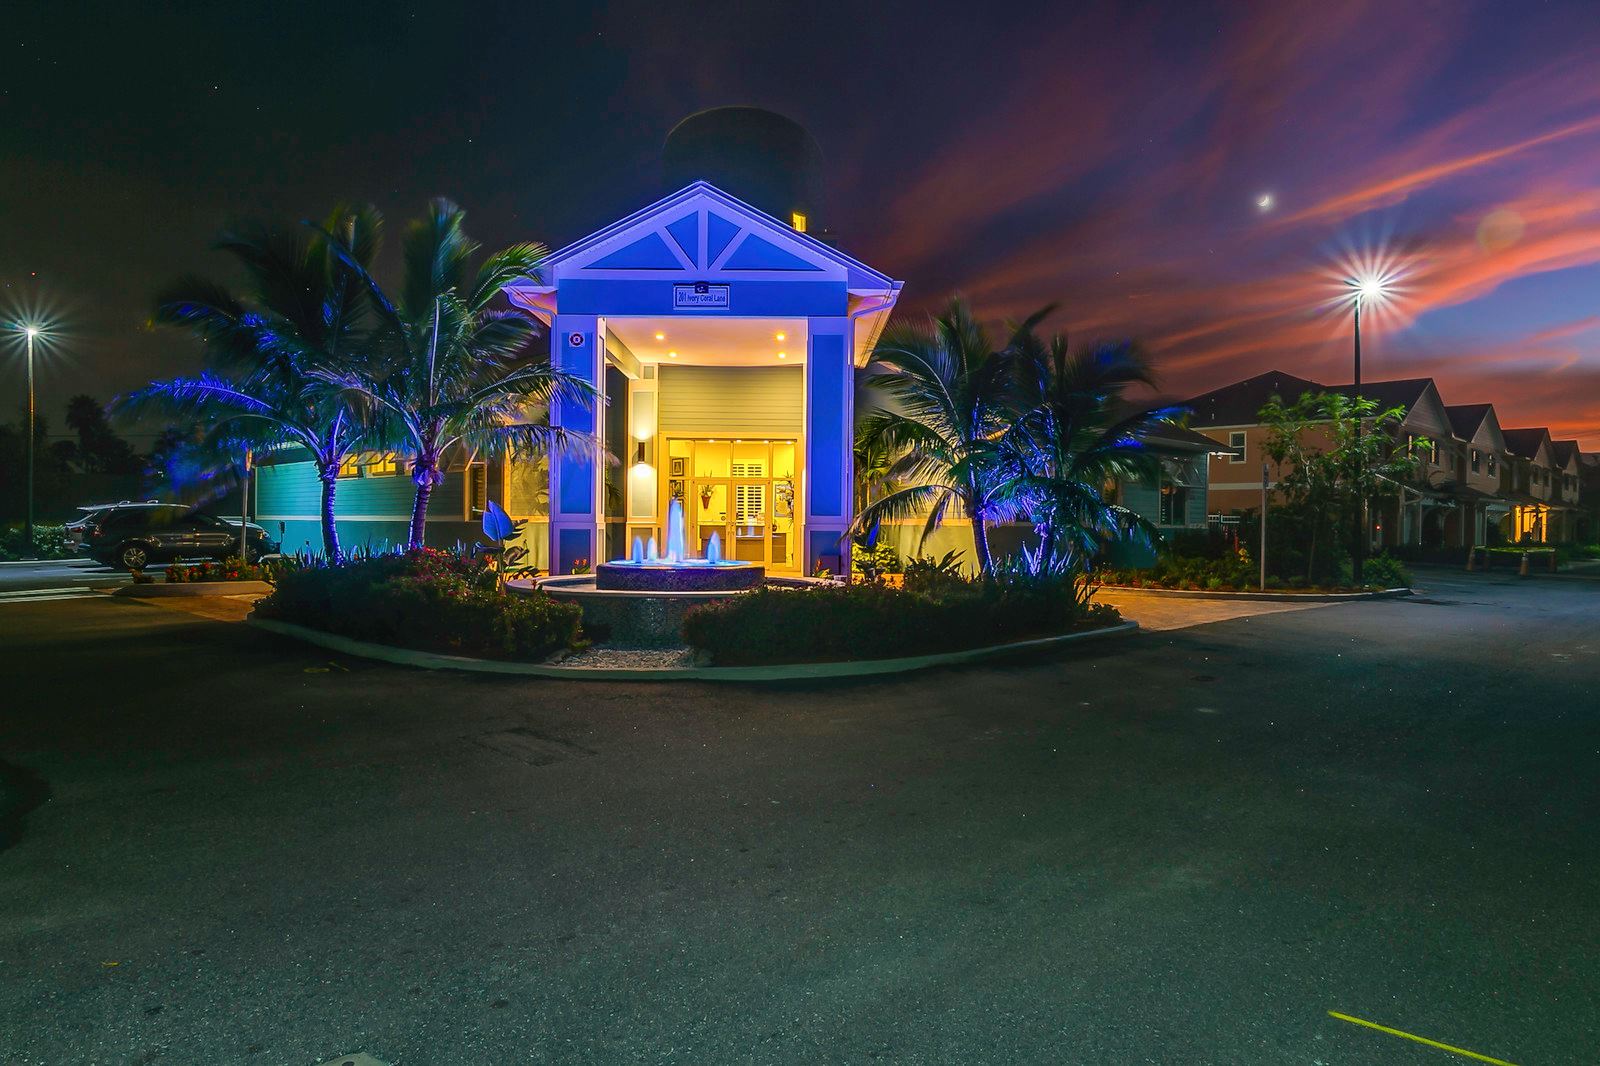 Cape Crossing Resort Clubhouse at night